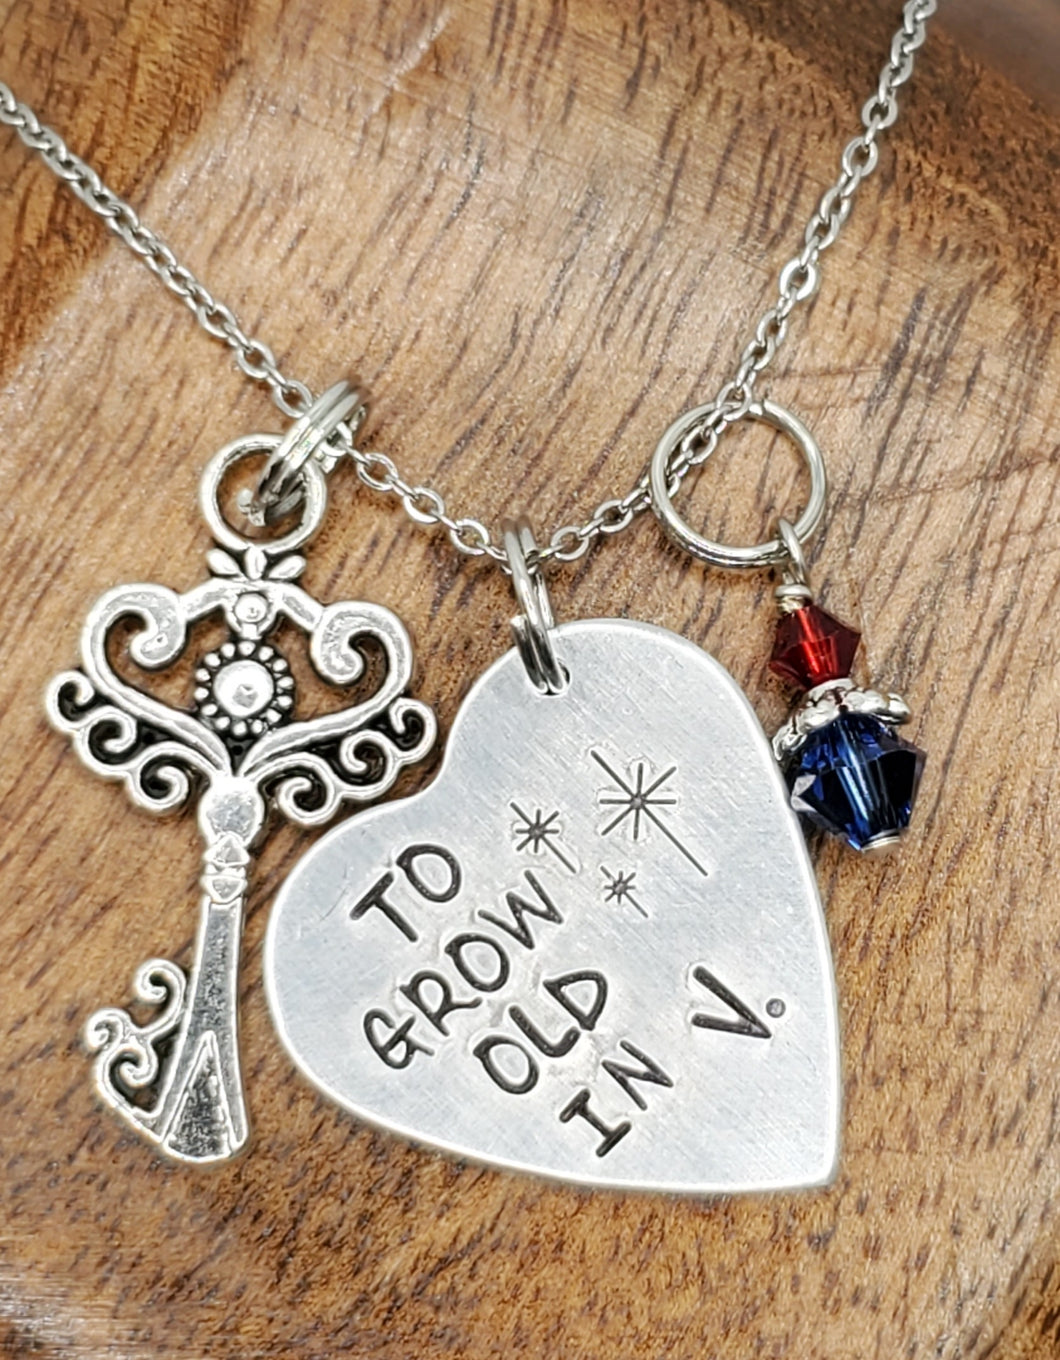 To Grow Old In - Charm Necklace